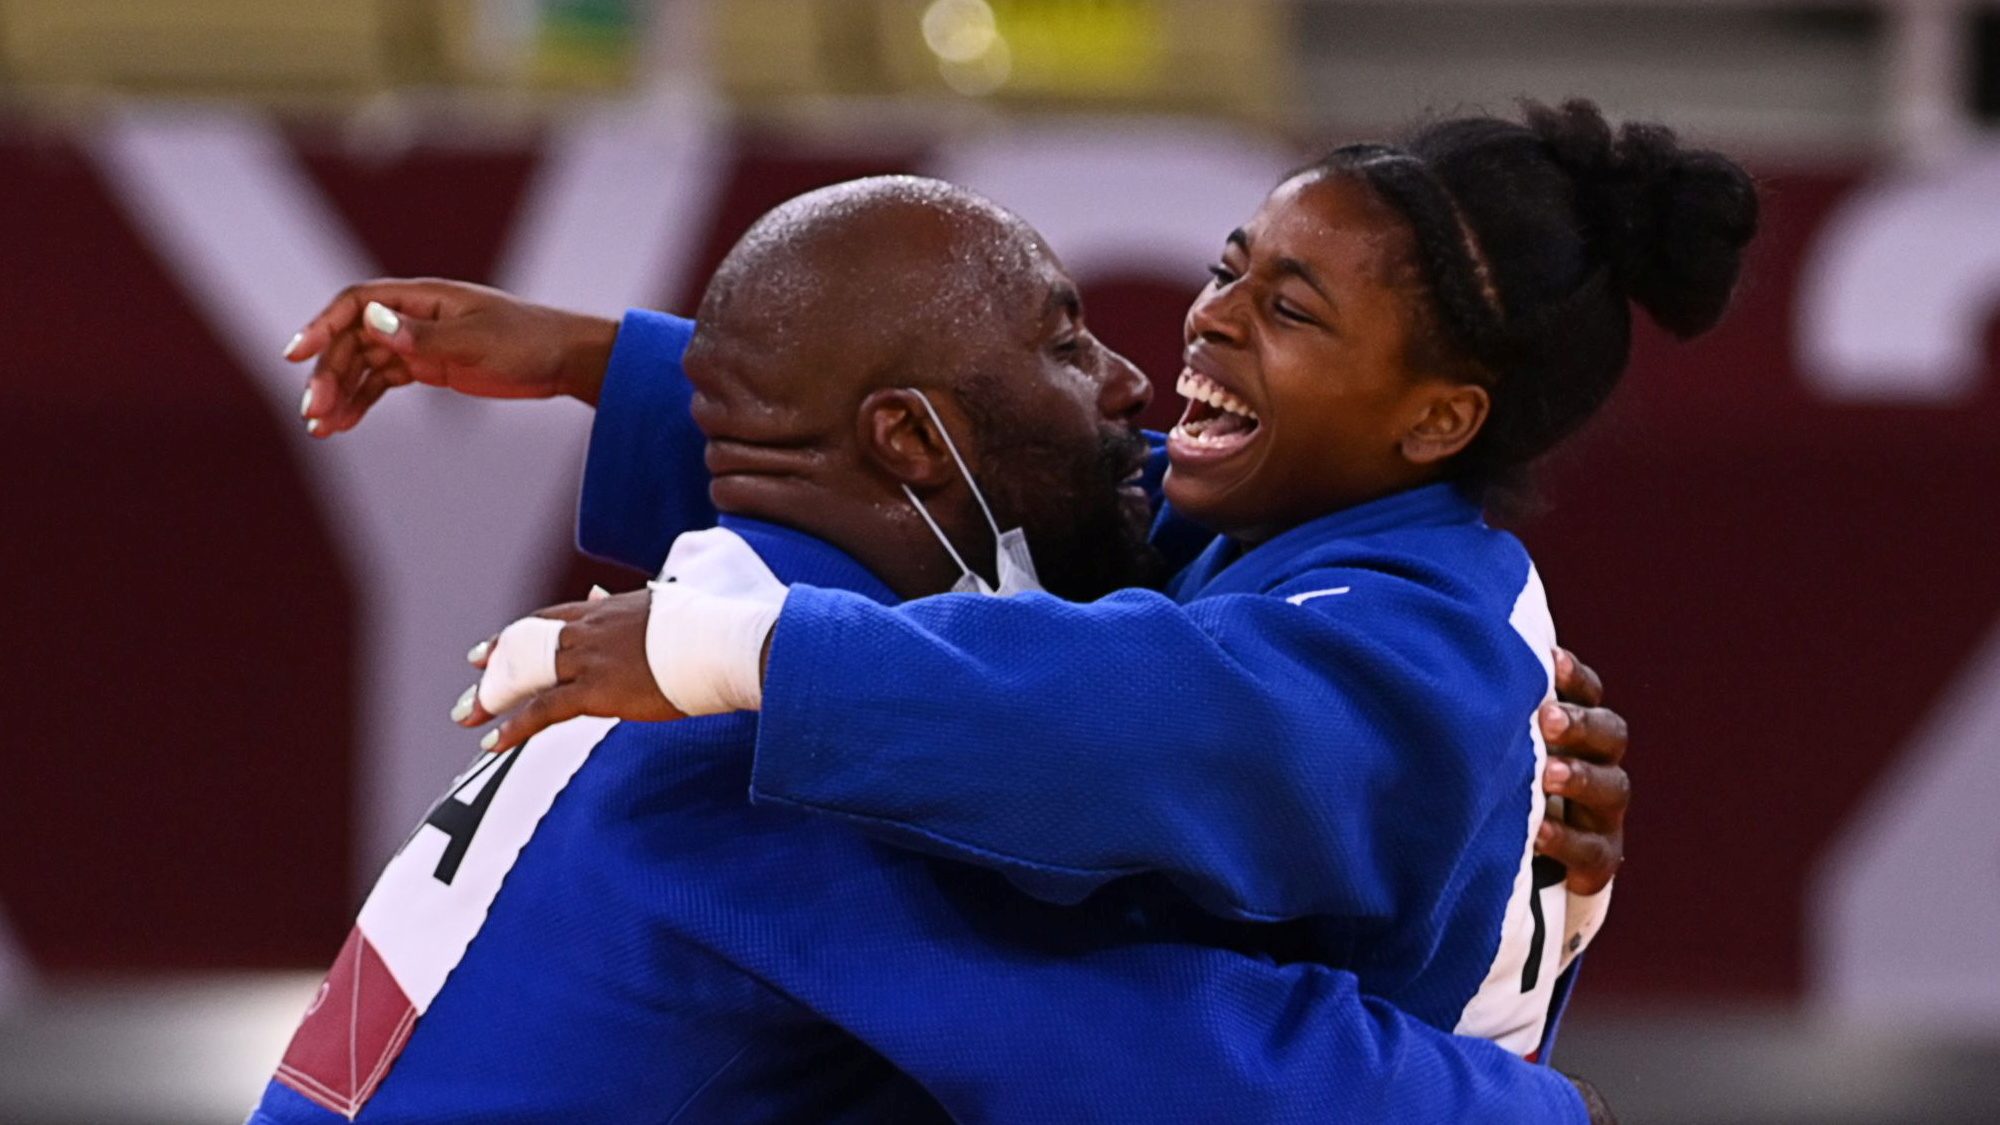 France wins judo gold medal in 1st mixed team event